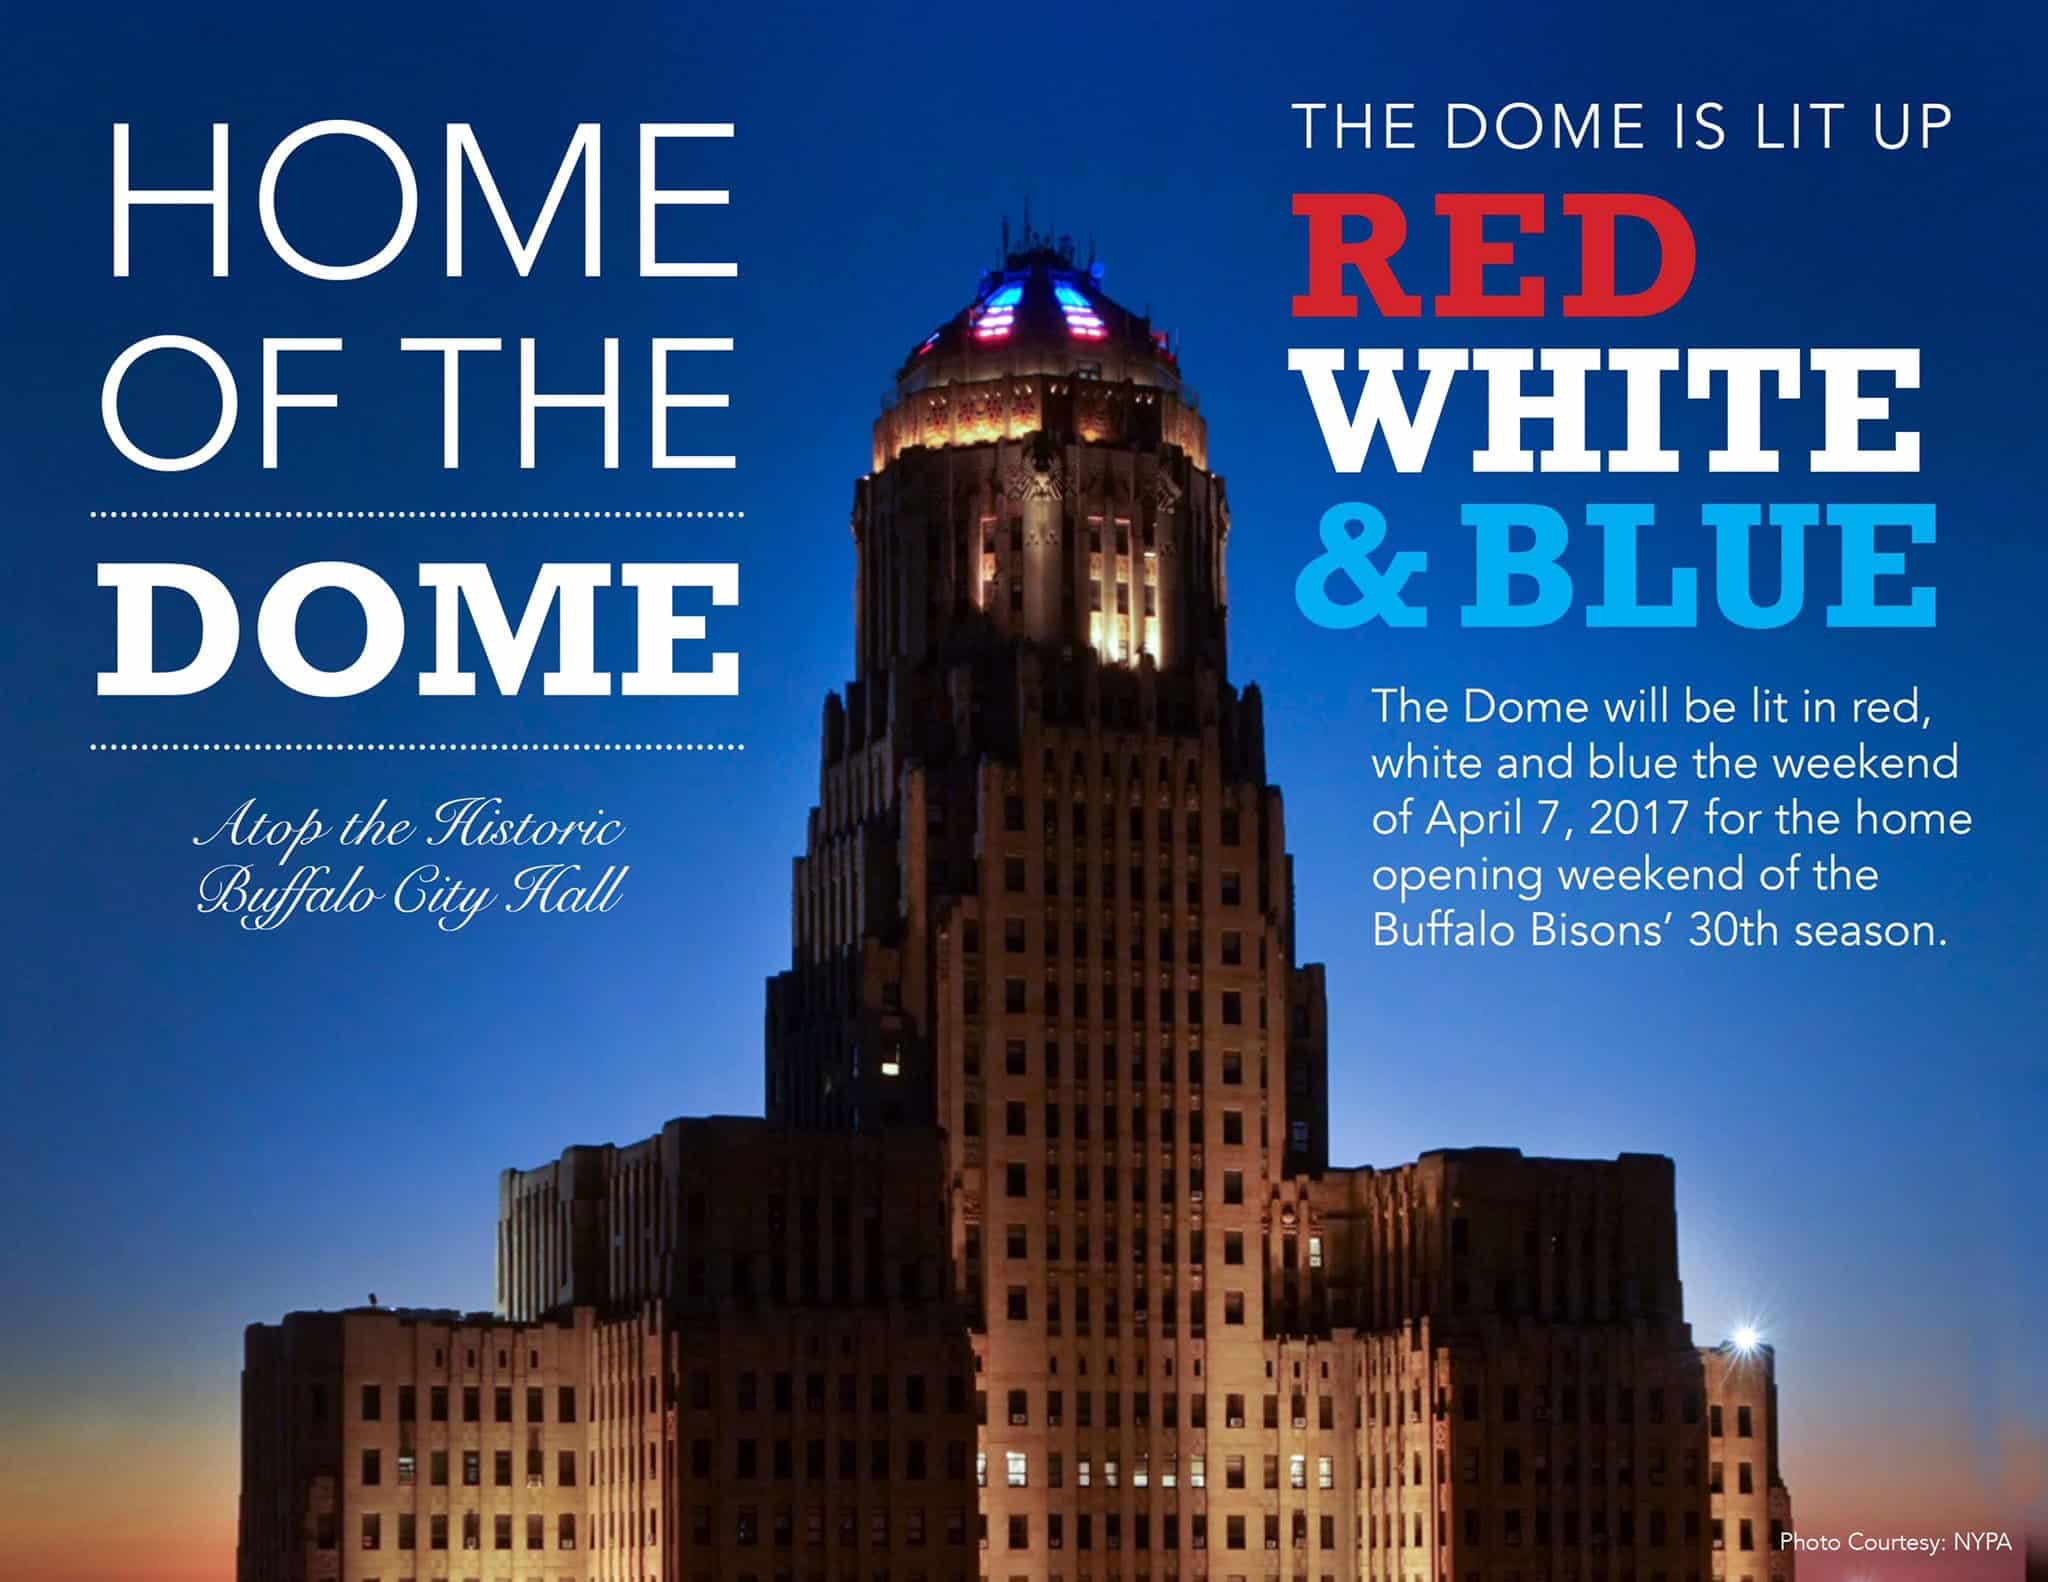 This is SO cool. Top of City Hall is Red, White, & Blue!